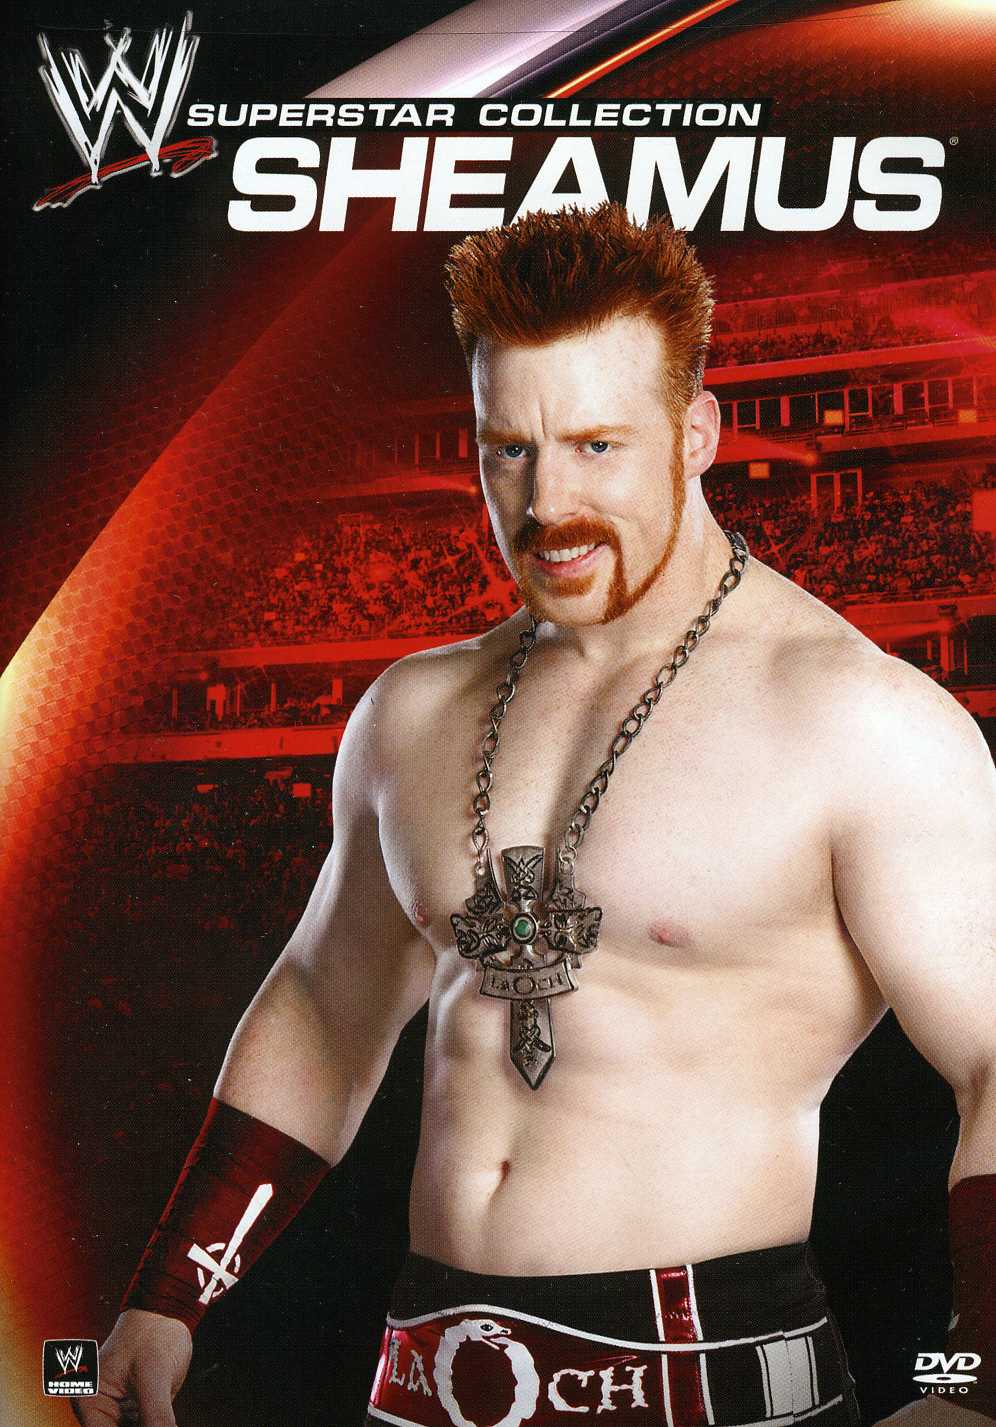 Image - WWE Superstar Collection - Sheamus DVD cover.jpg | Pro ...